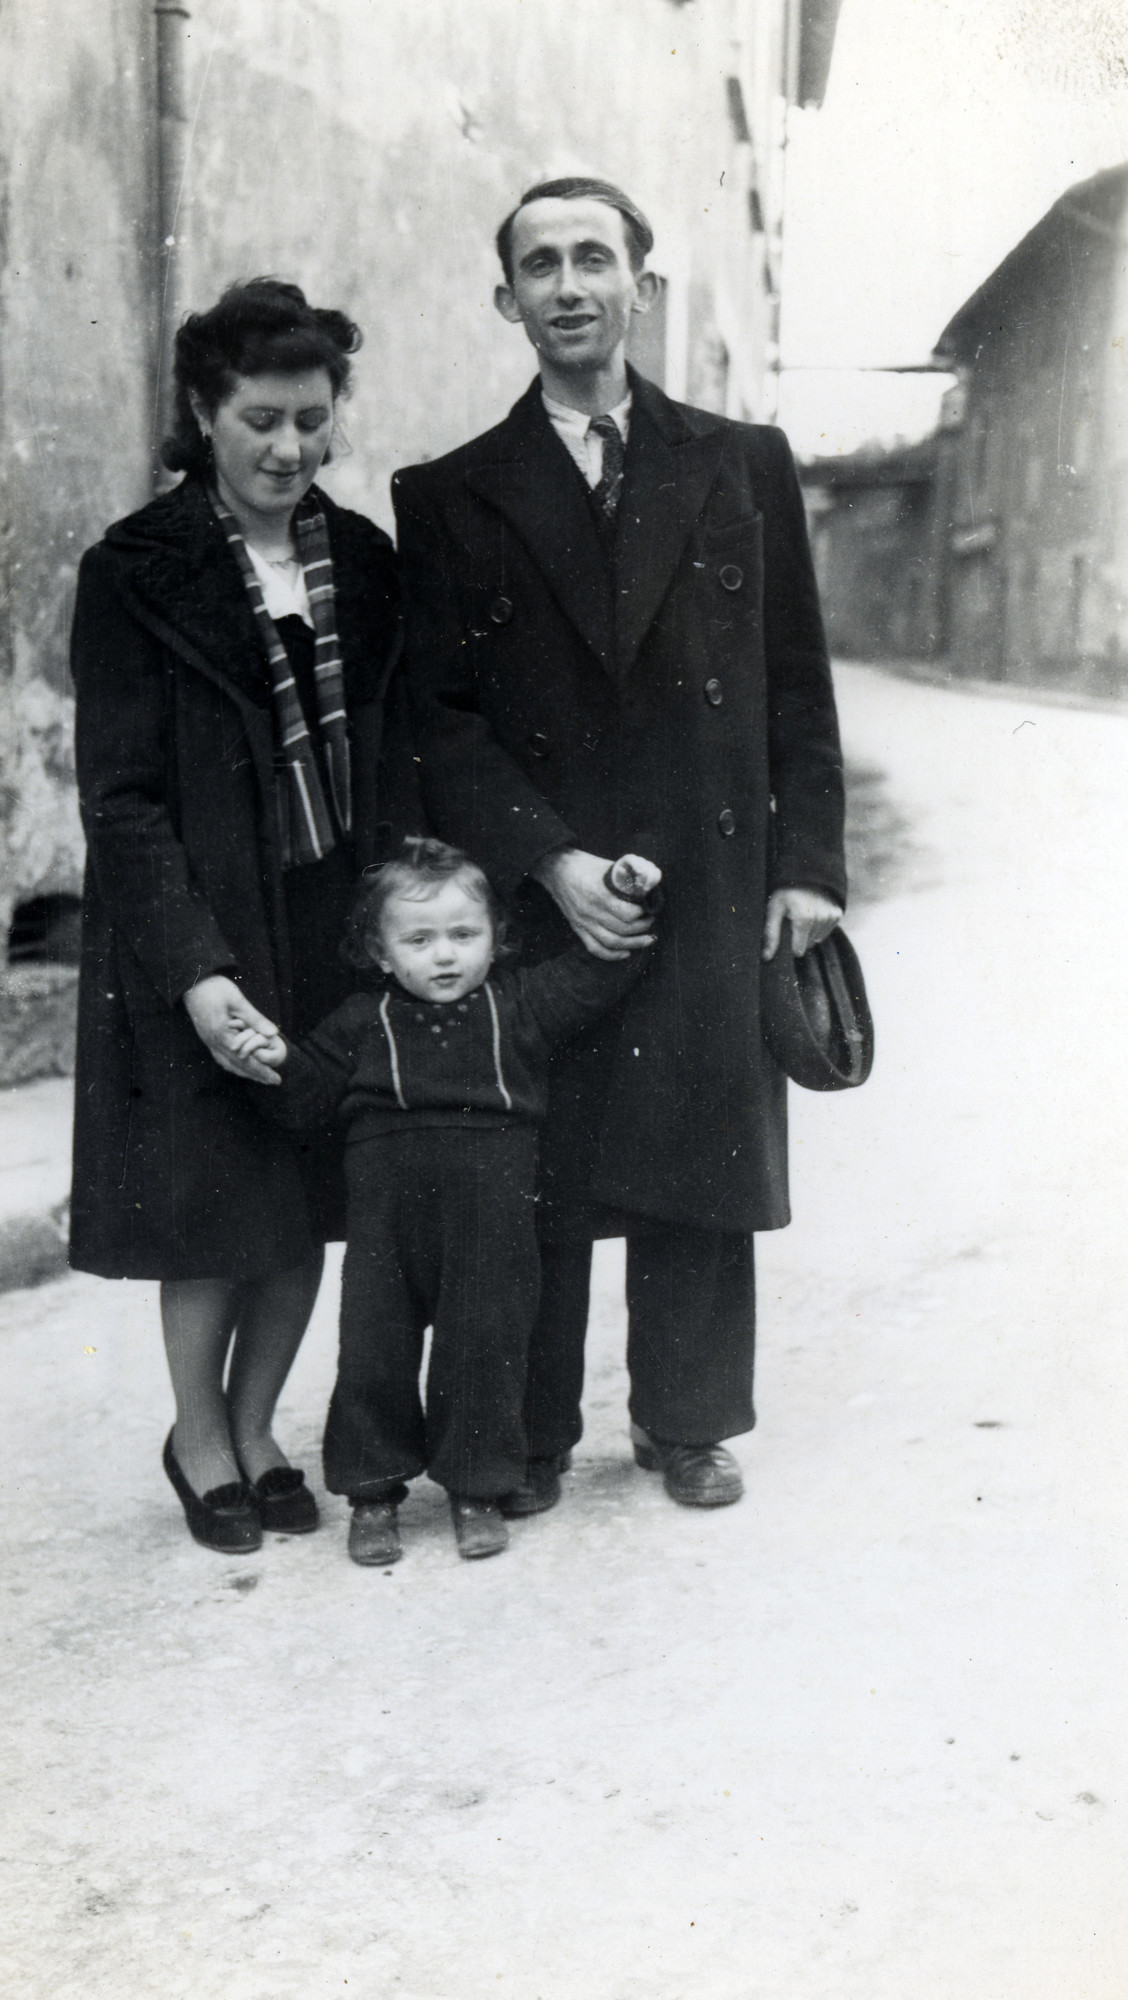 A French Jewish family stands for photograph on the street of Moirans, France.

Pictured are Laja and George Tannenbaum, with their son Lazare.